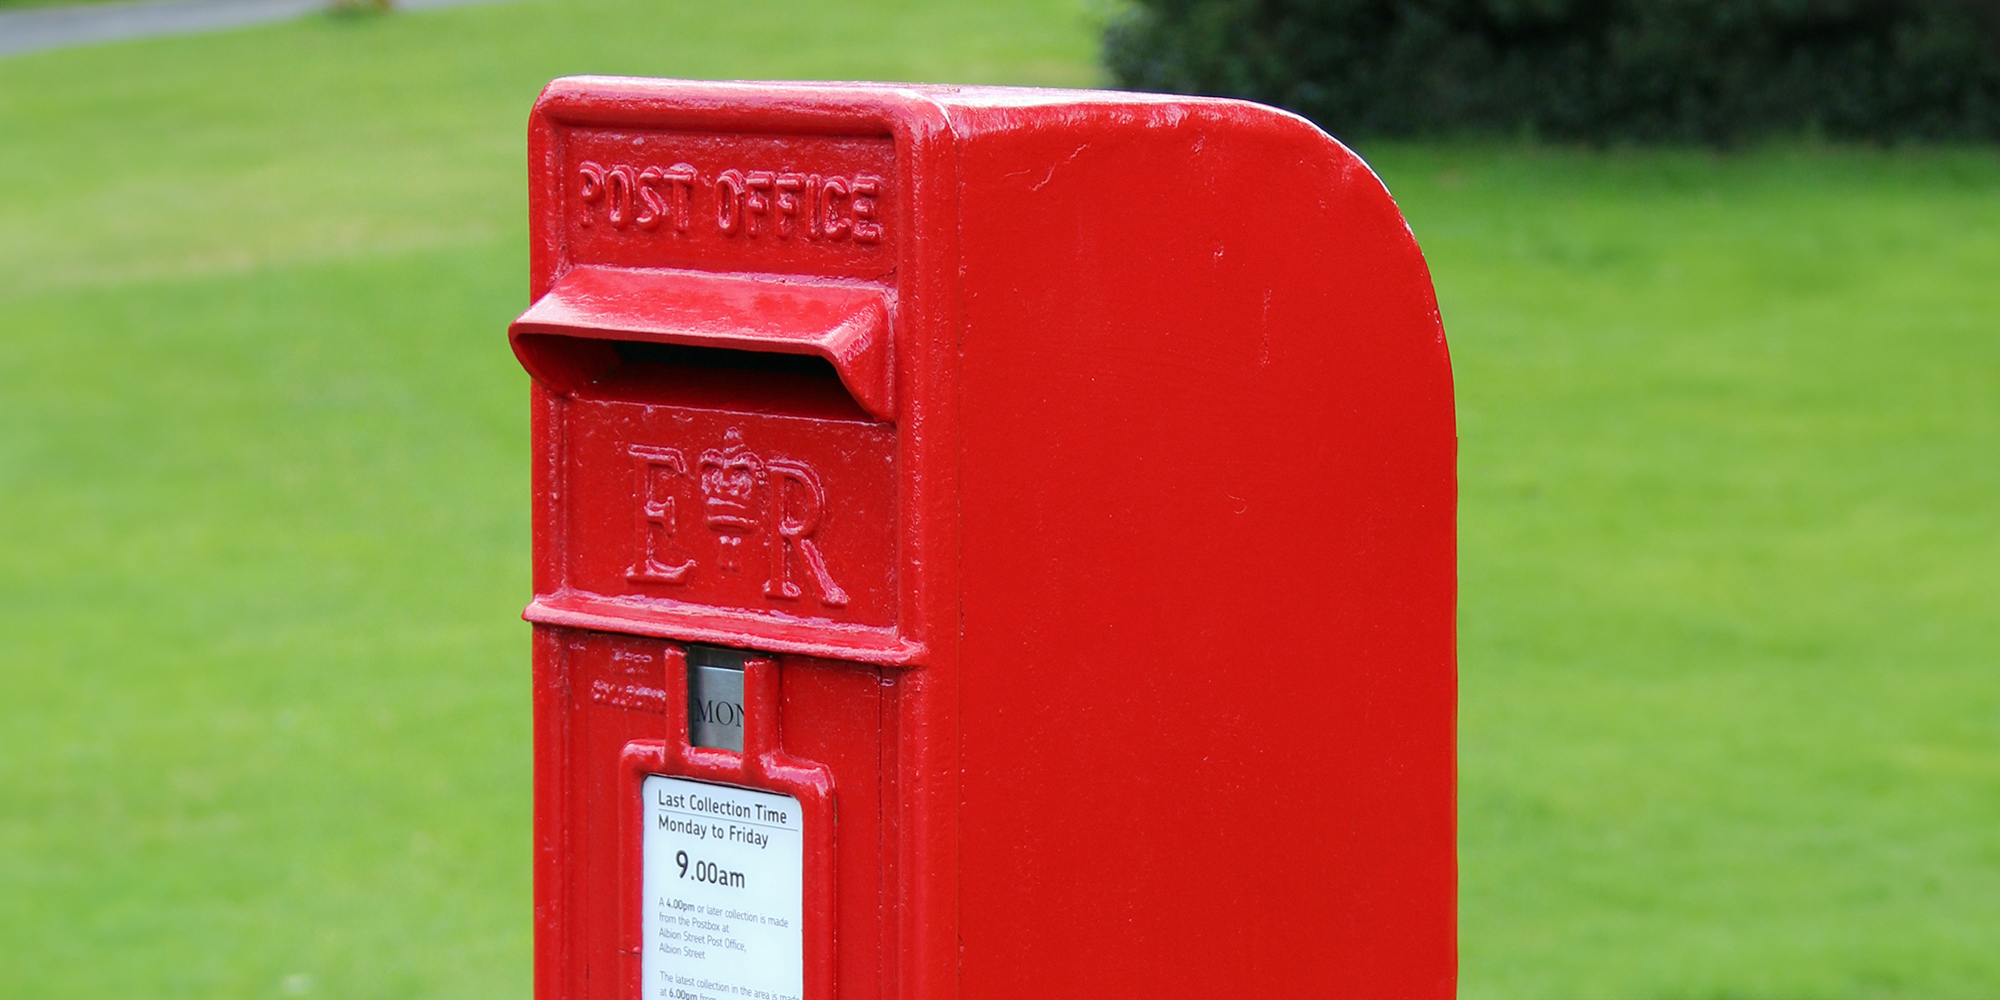 Photograph of a postbox